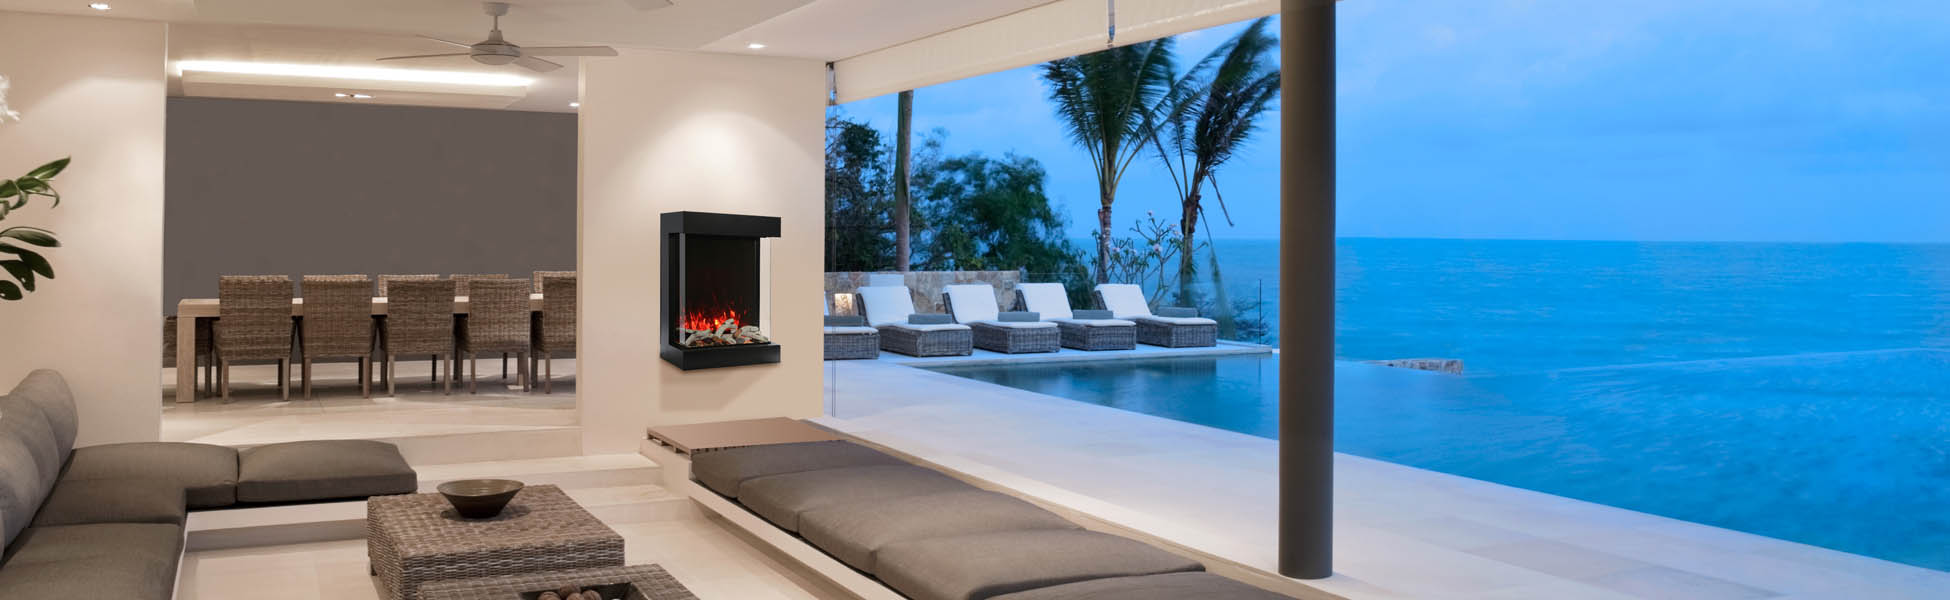 Cube outdoor electric fireplace